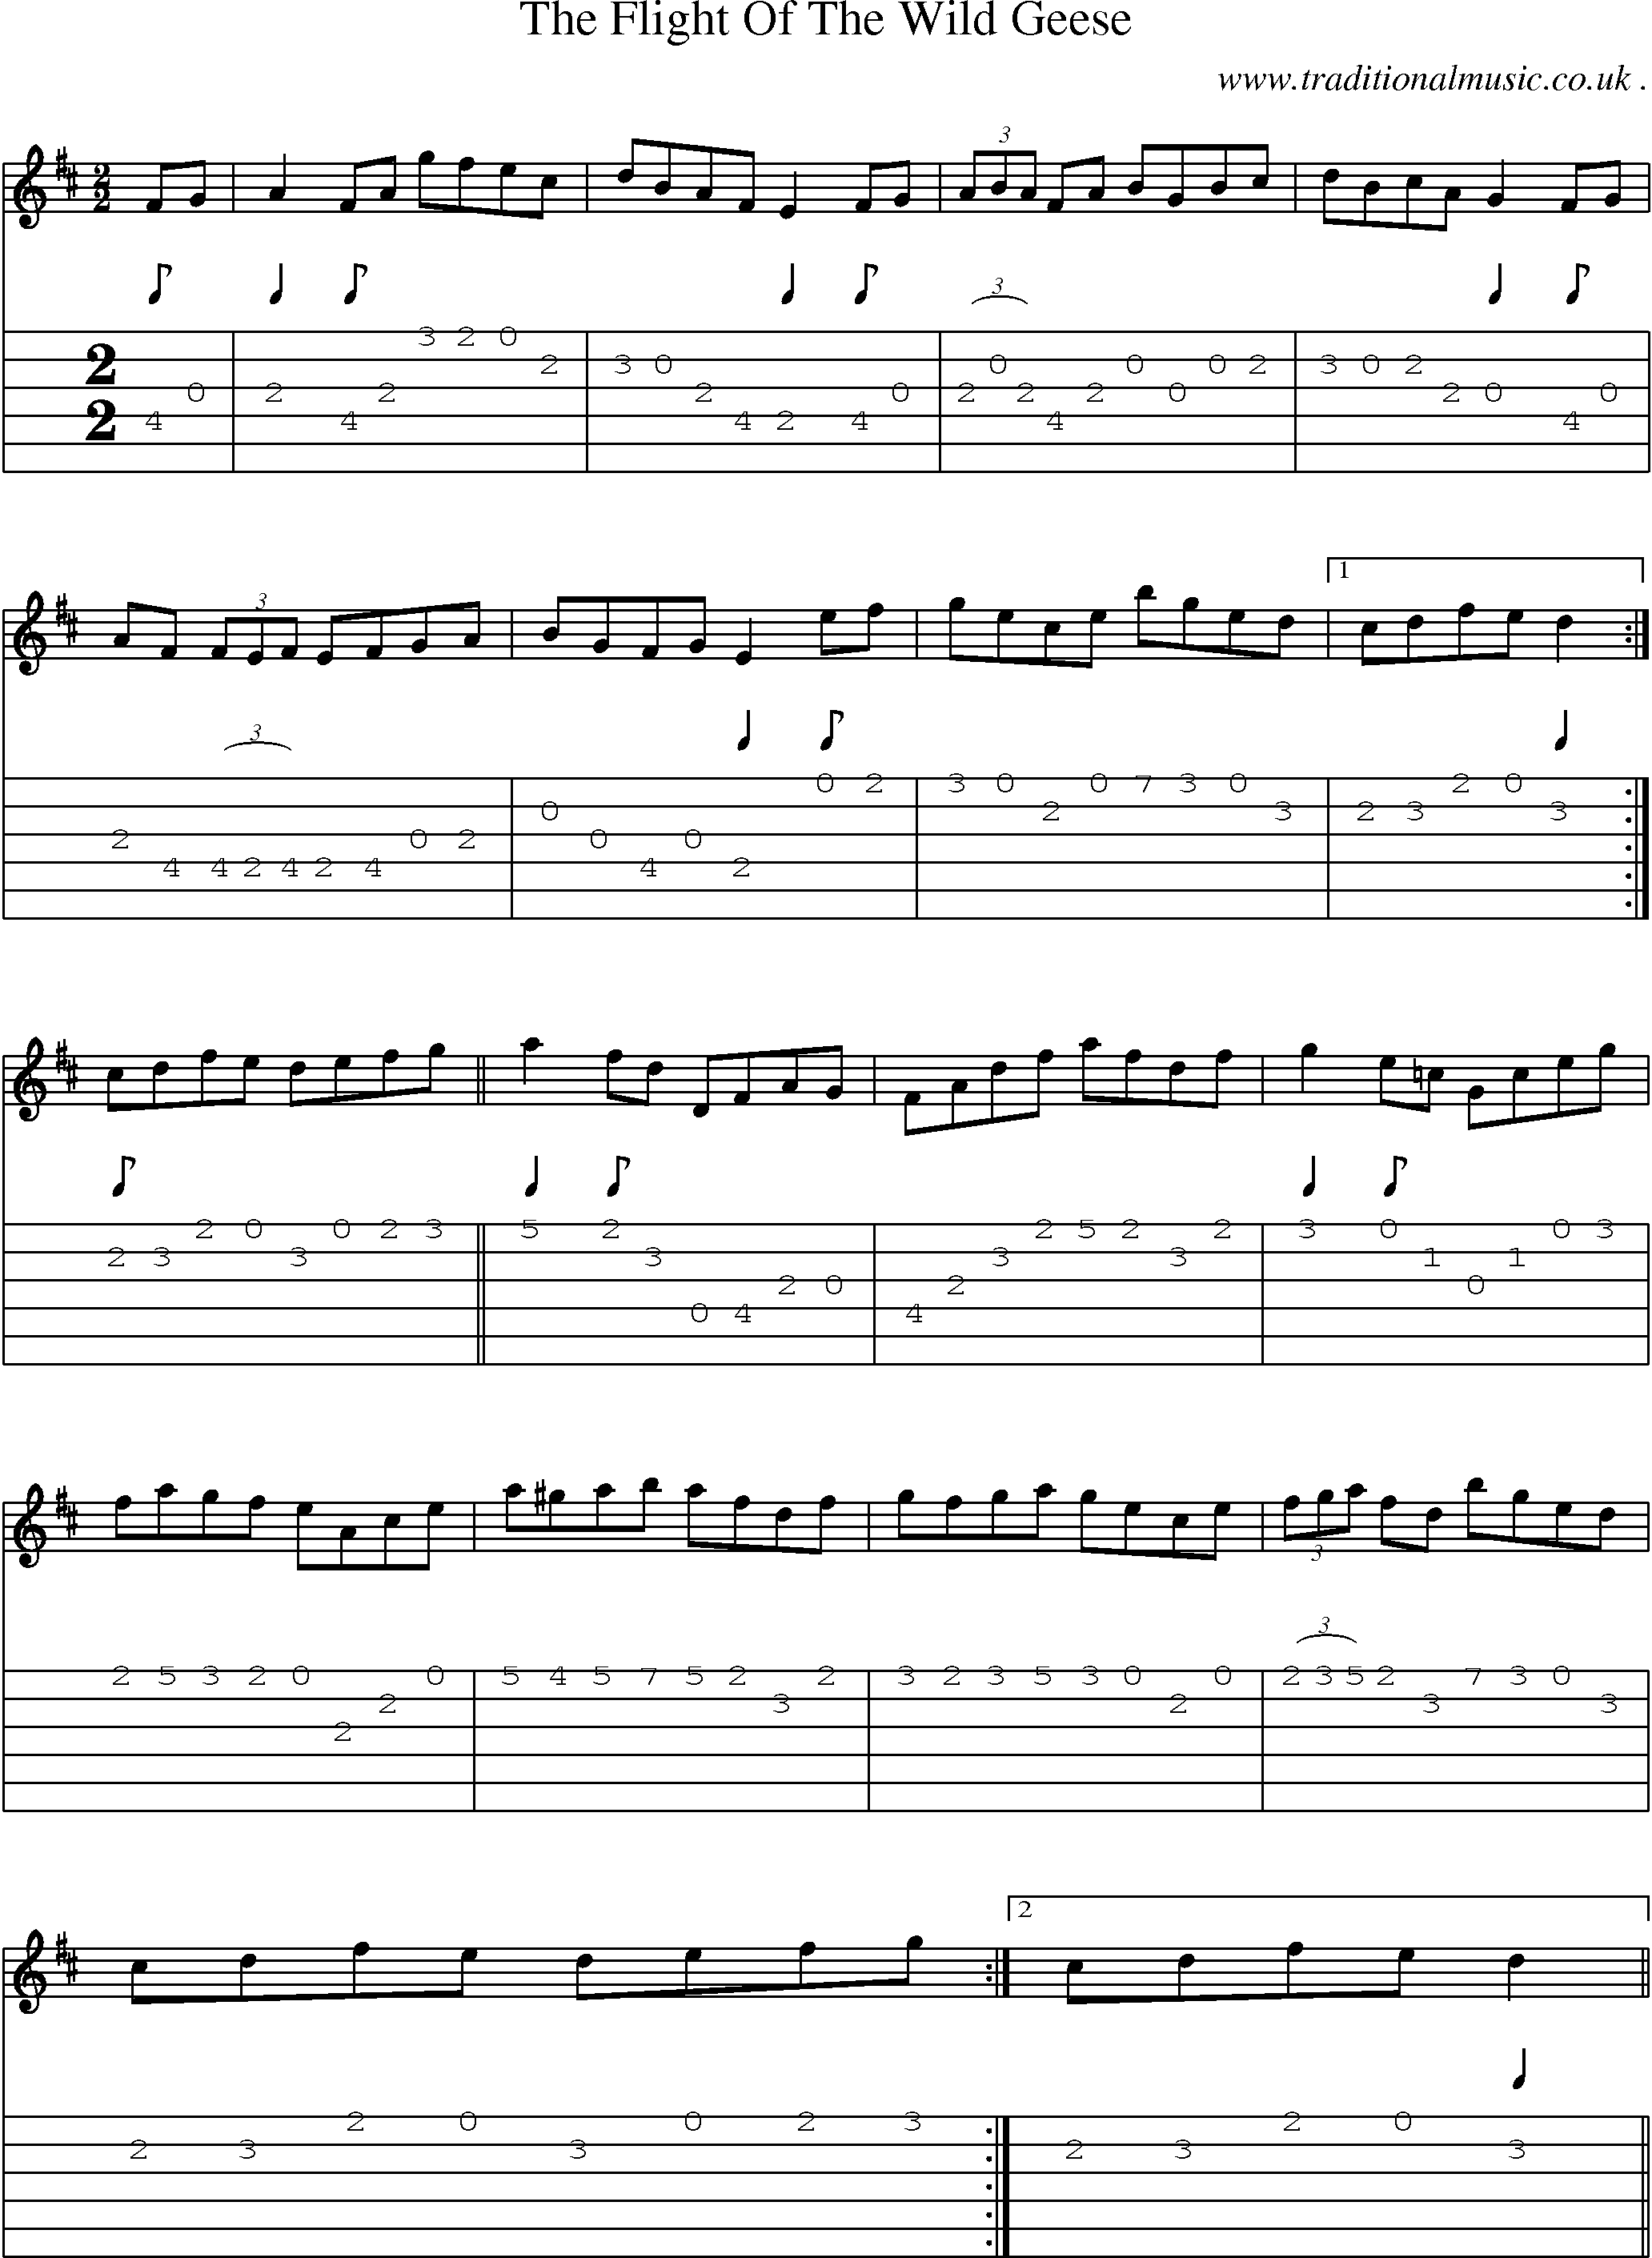 Sheet-Music and Guitar Tabs for The Flight Of The Wild Geese